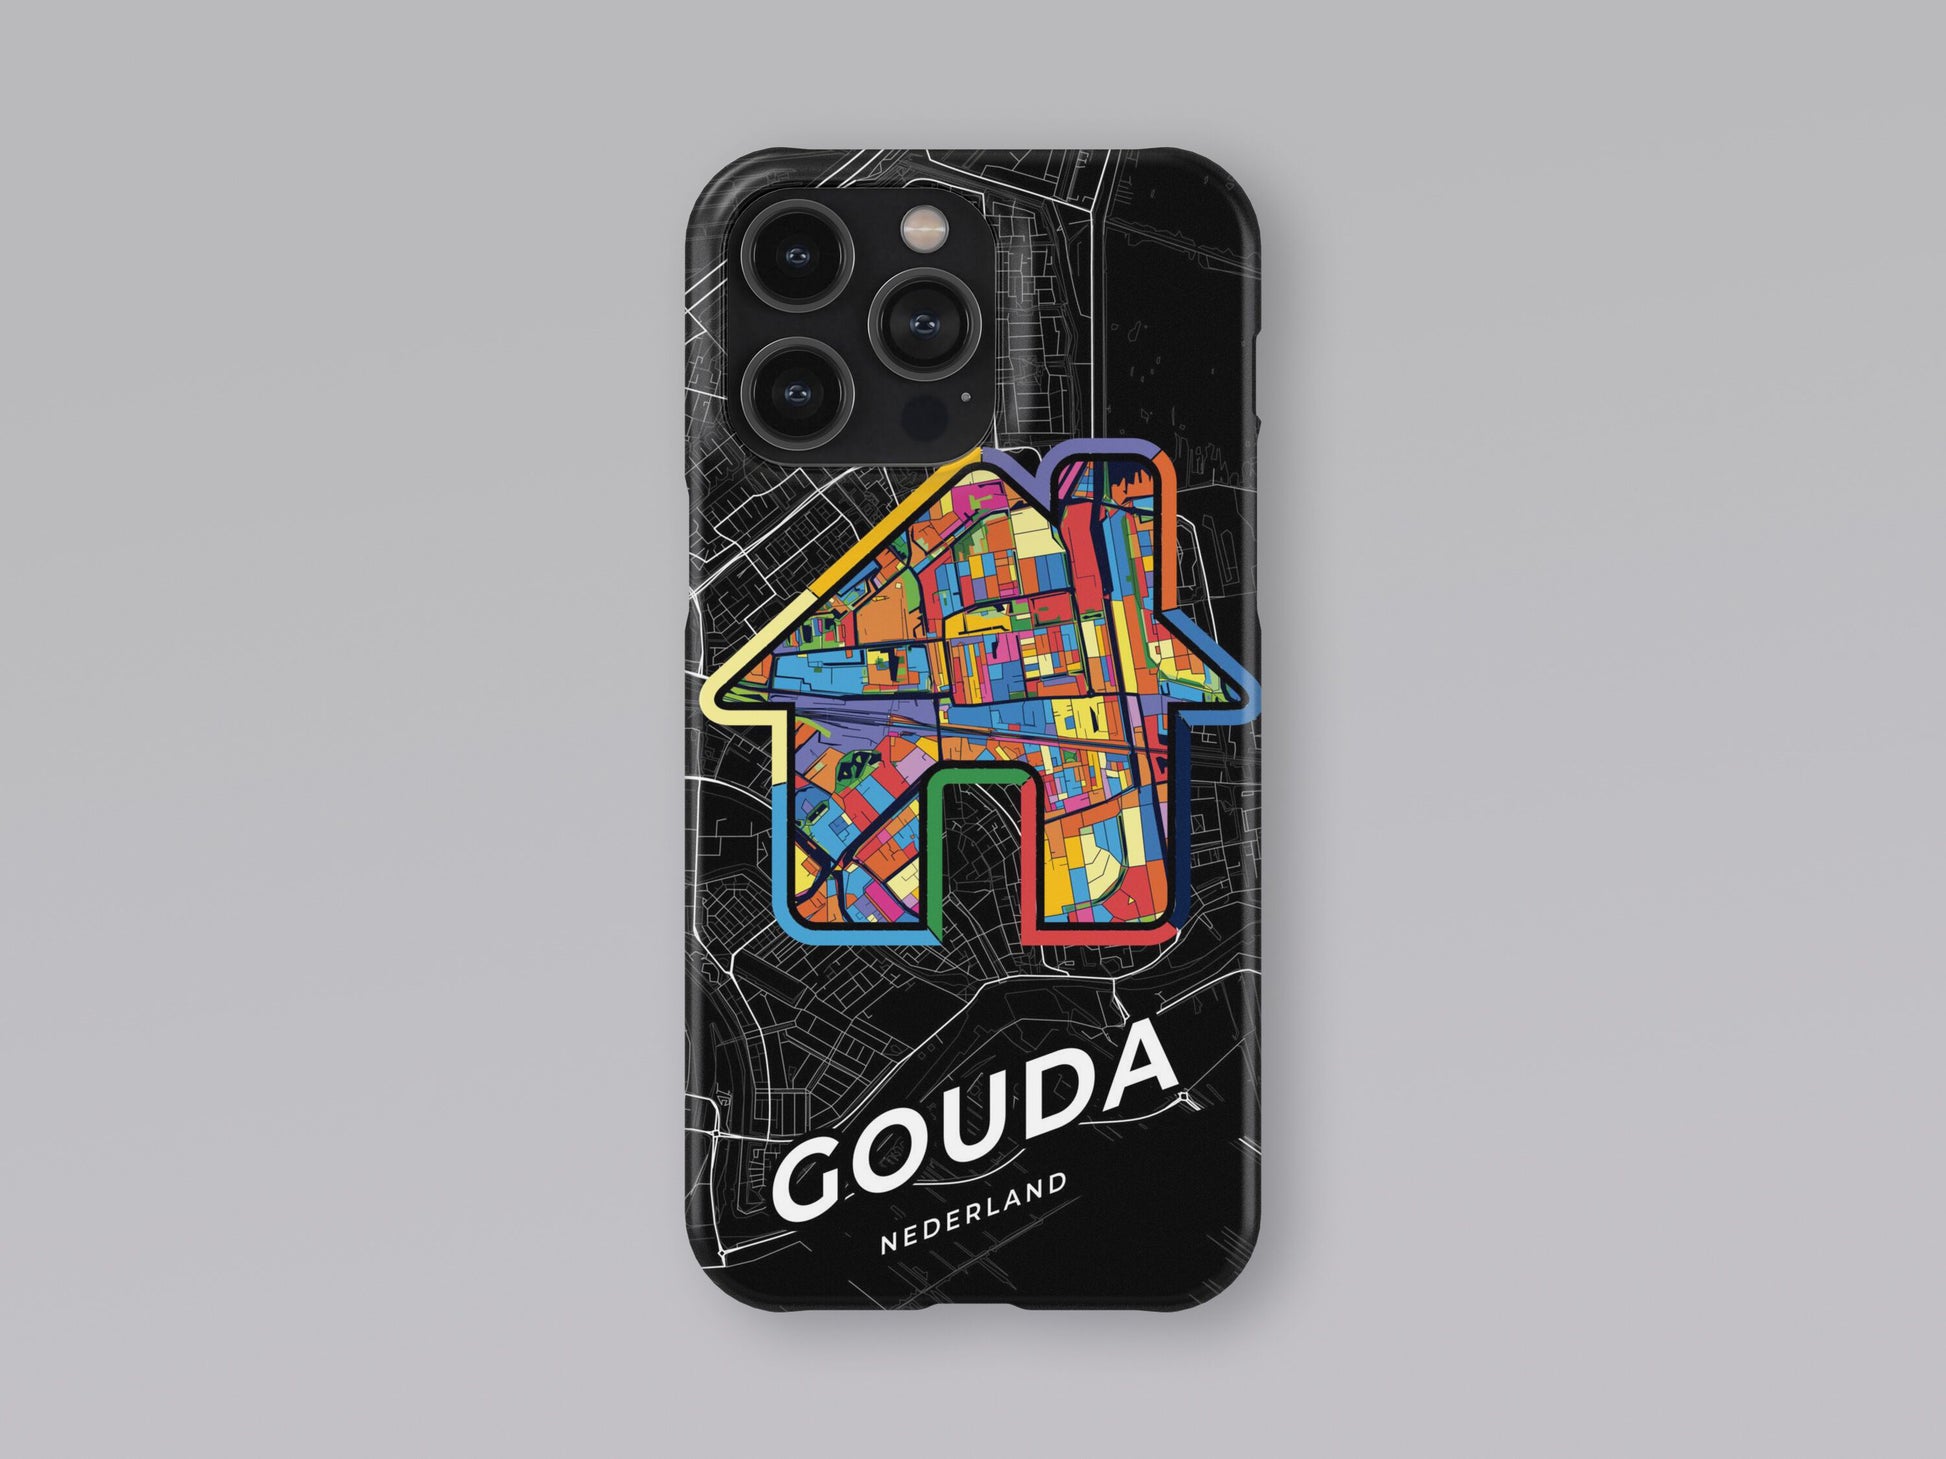 Gouda Netherlands slim phone case with colorful icon. Birthday, wedding or housewarming gift. Couple match cases. 3